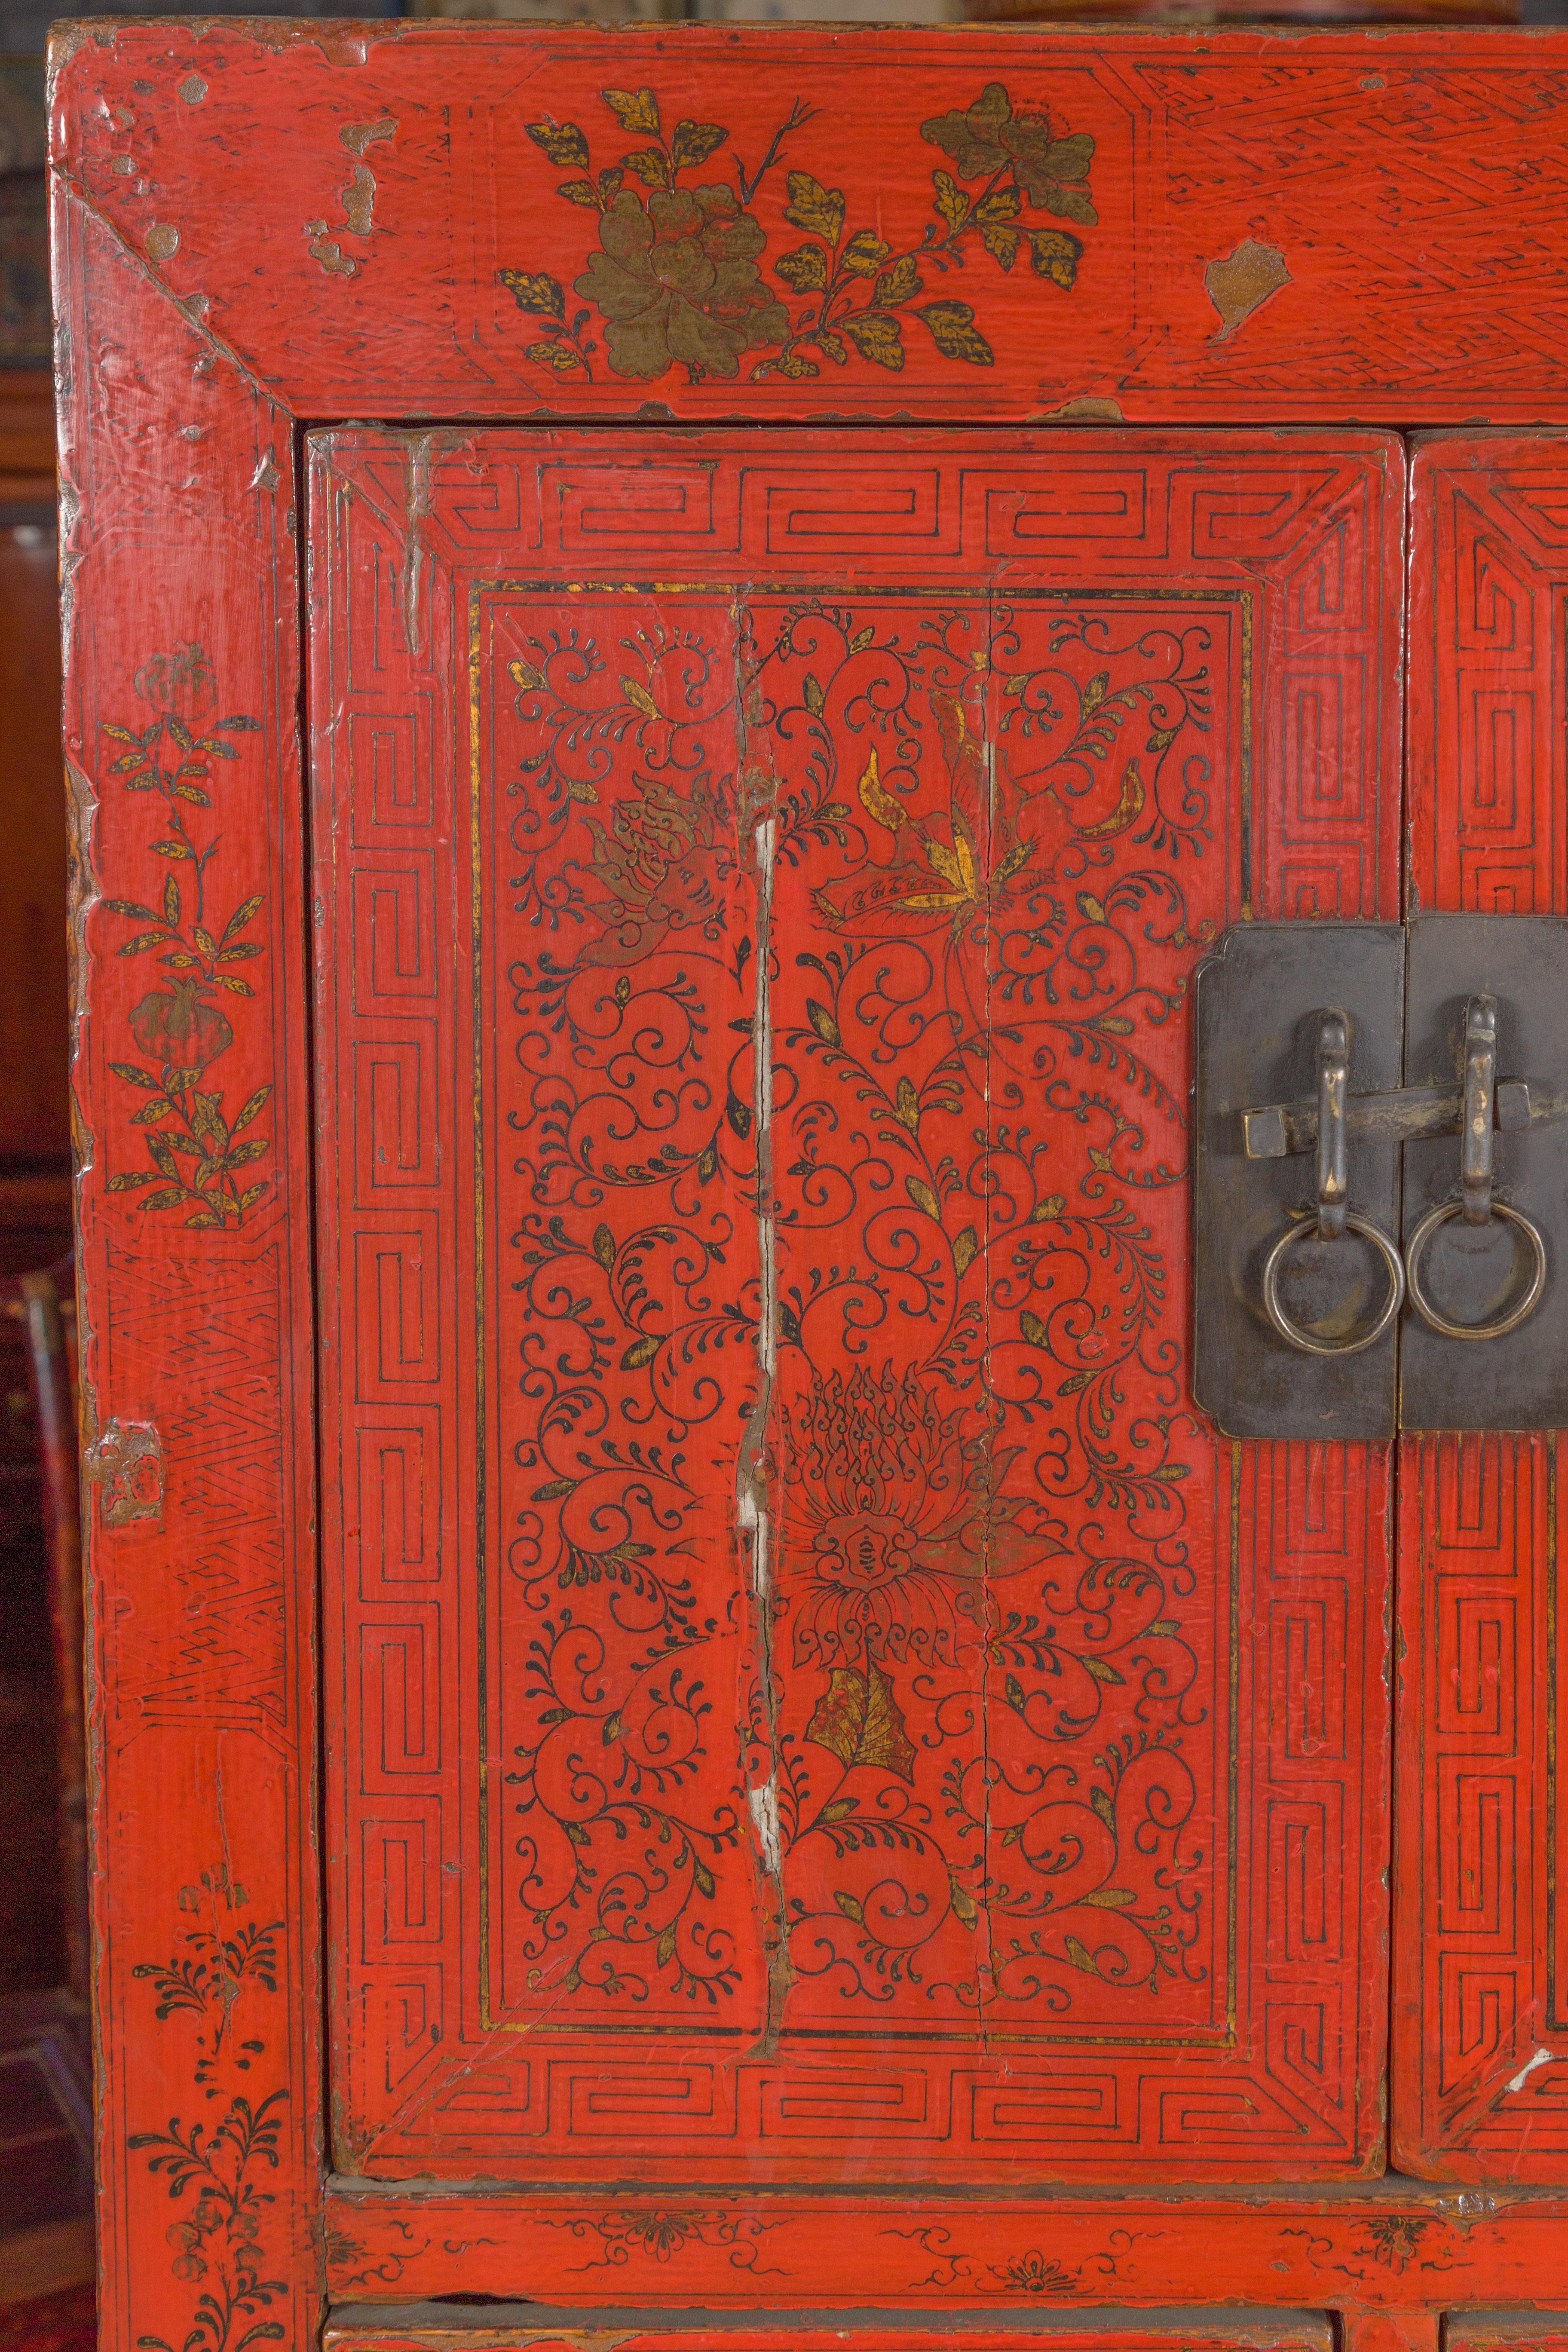 Chinese Qing Dynasty 19th Century Red Lacquered Cabinet with Gold Floral Motifs 2